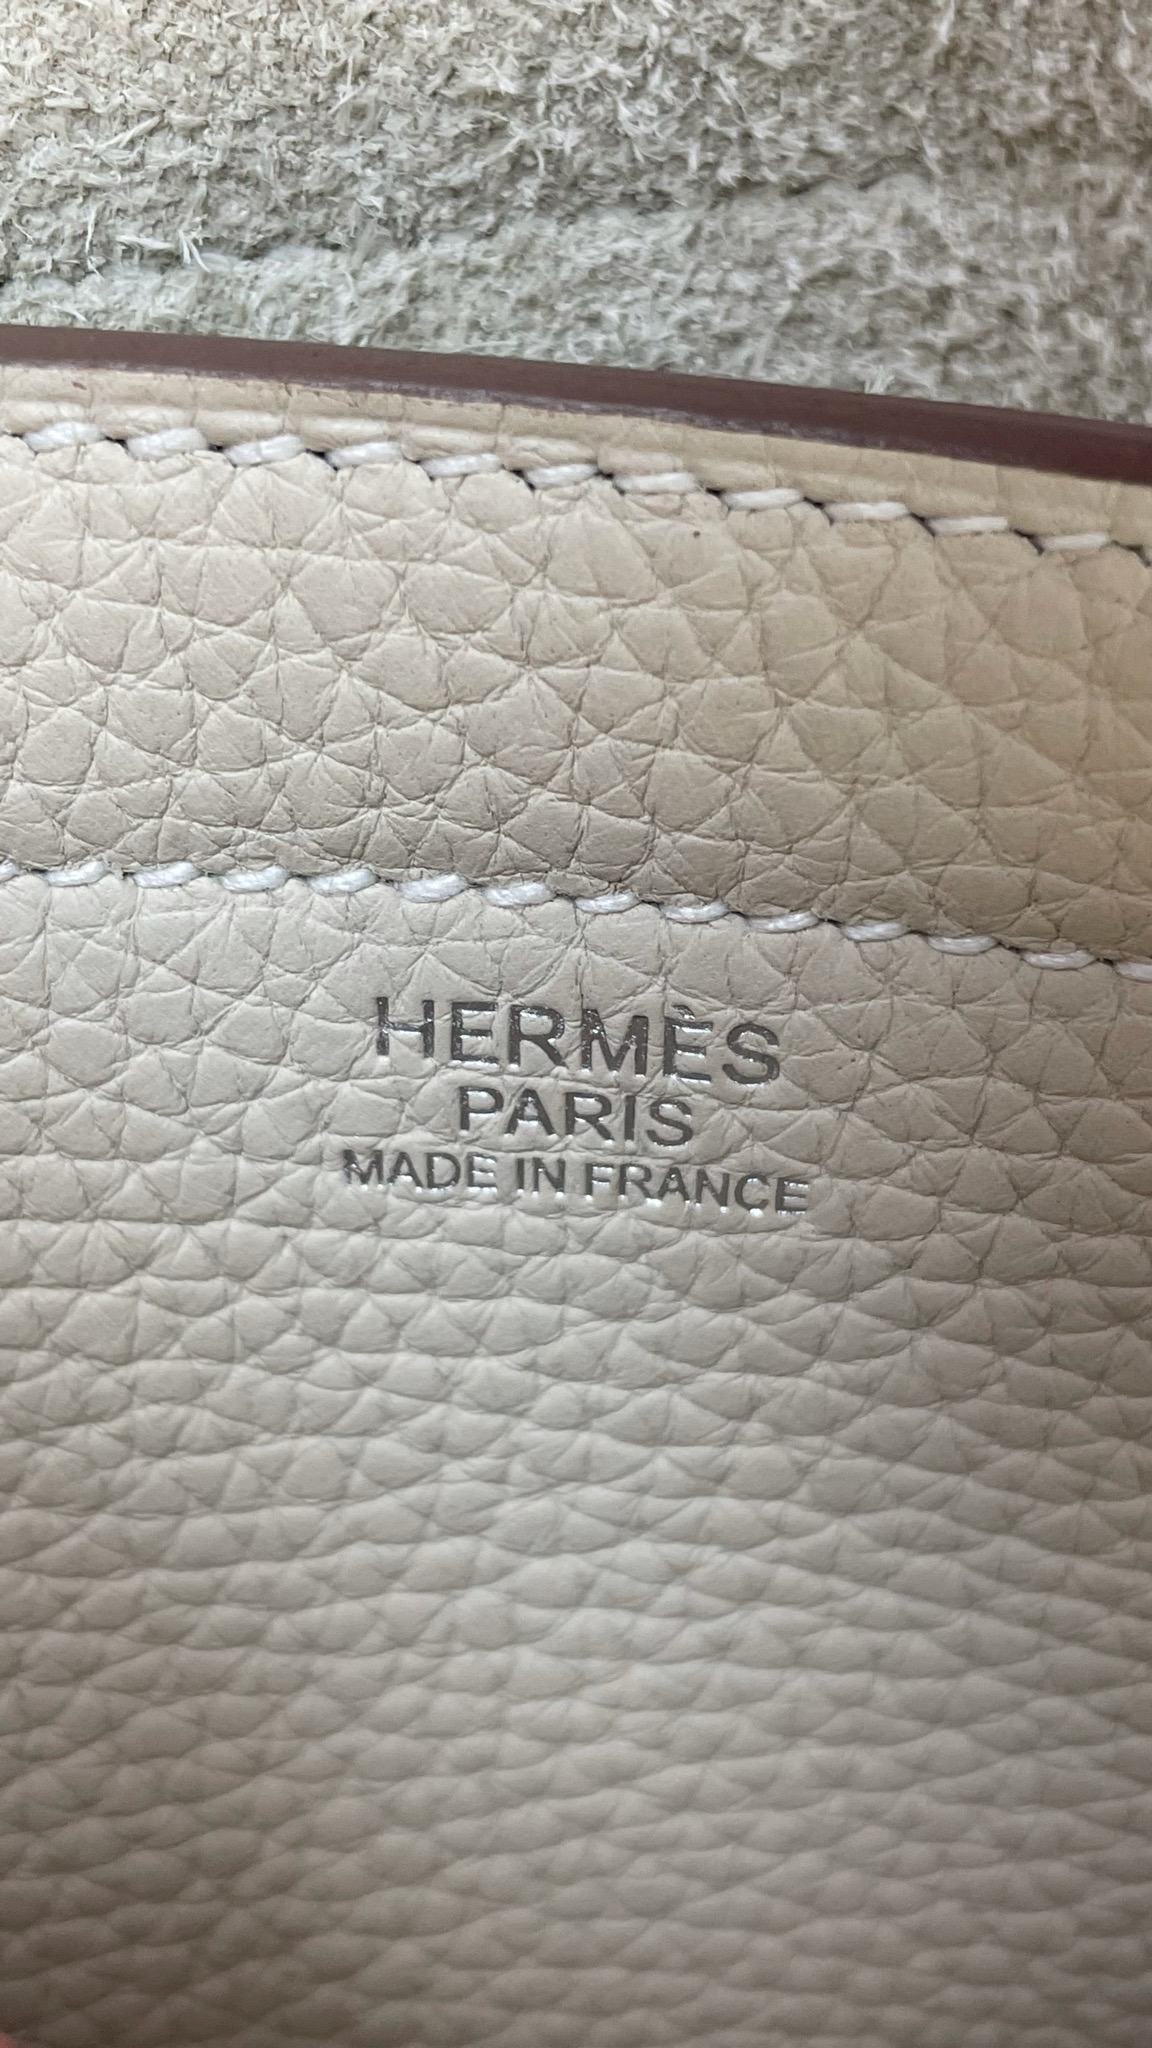 Hermes Cabasellier Tote 46 - Clemence - Etoupe - New with small defect